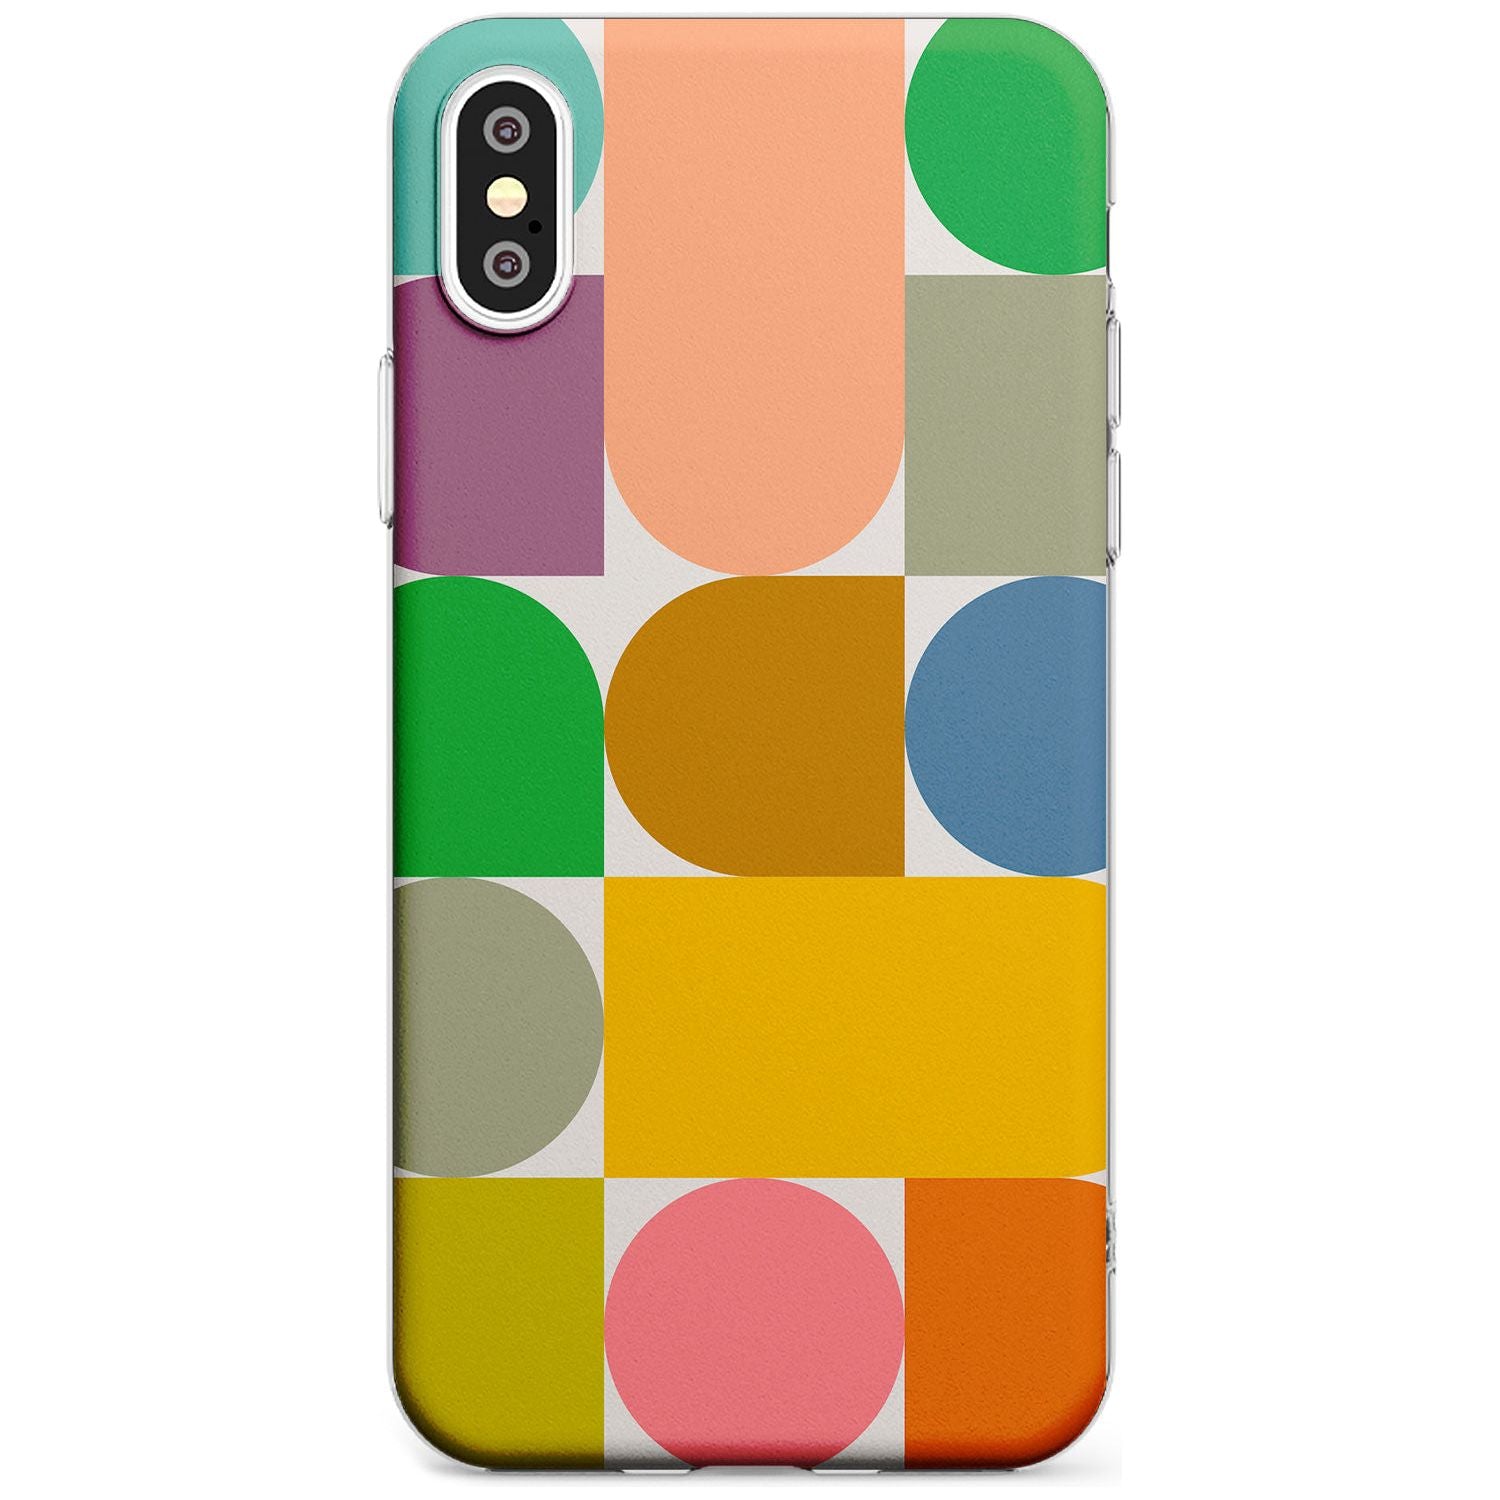 Abstract Retro Shapes: Rainbow Mix Black Impact Phone Case for iPhone X XS Max XR